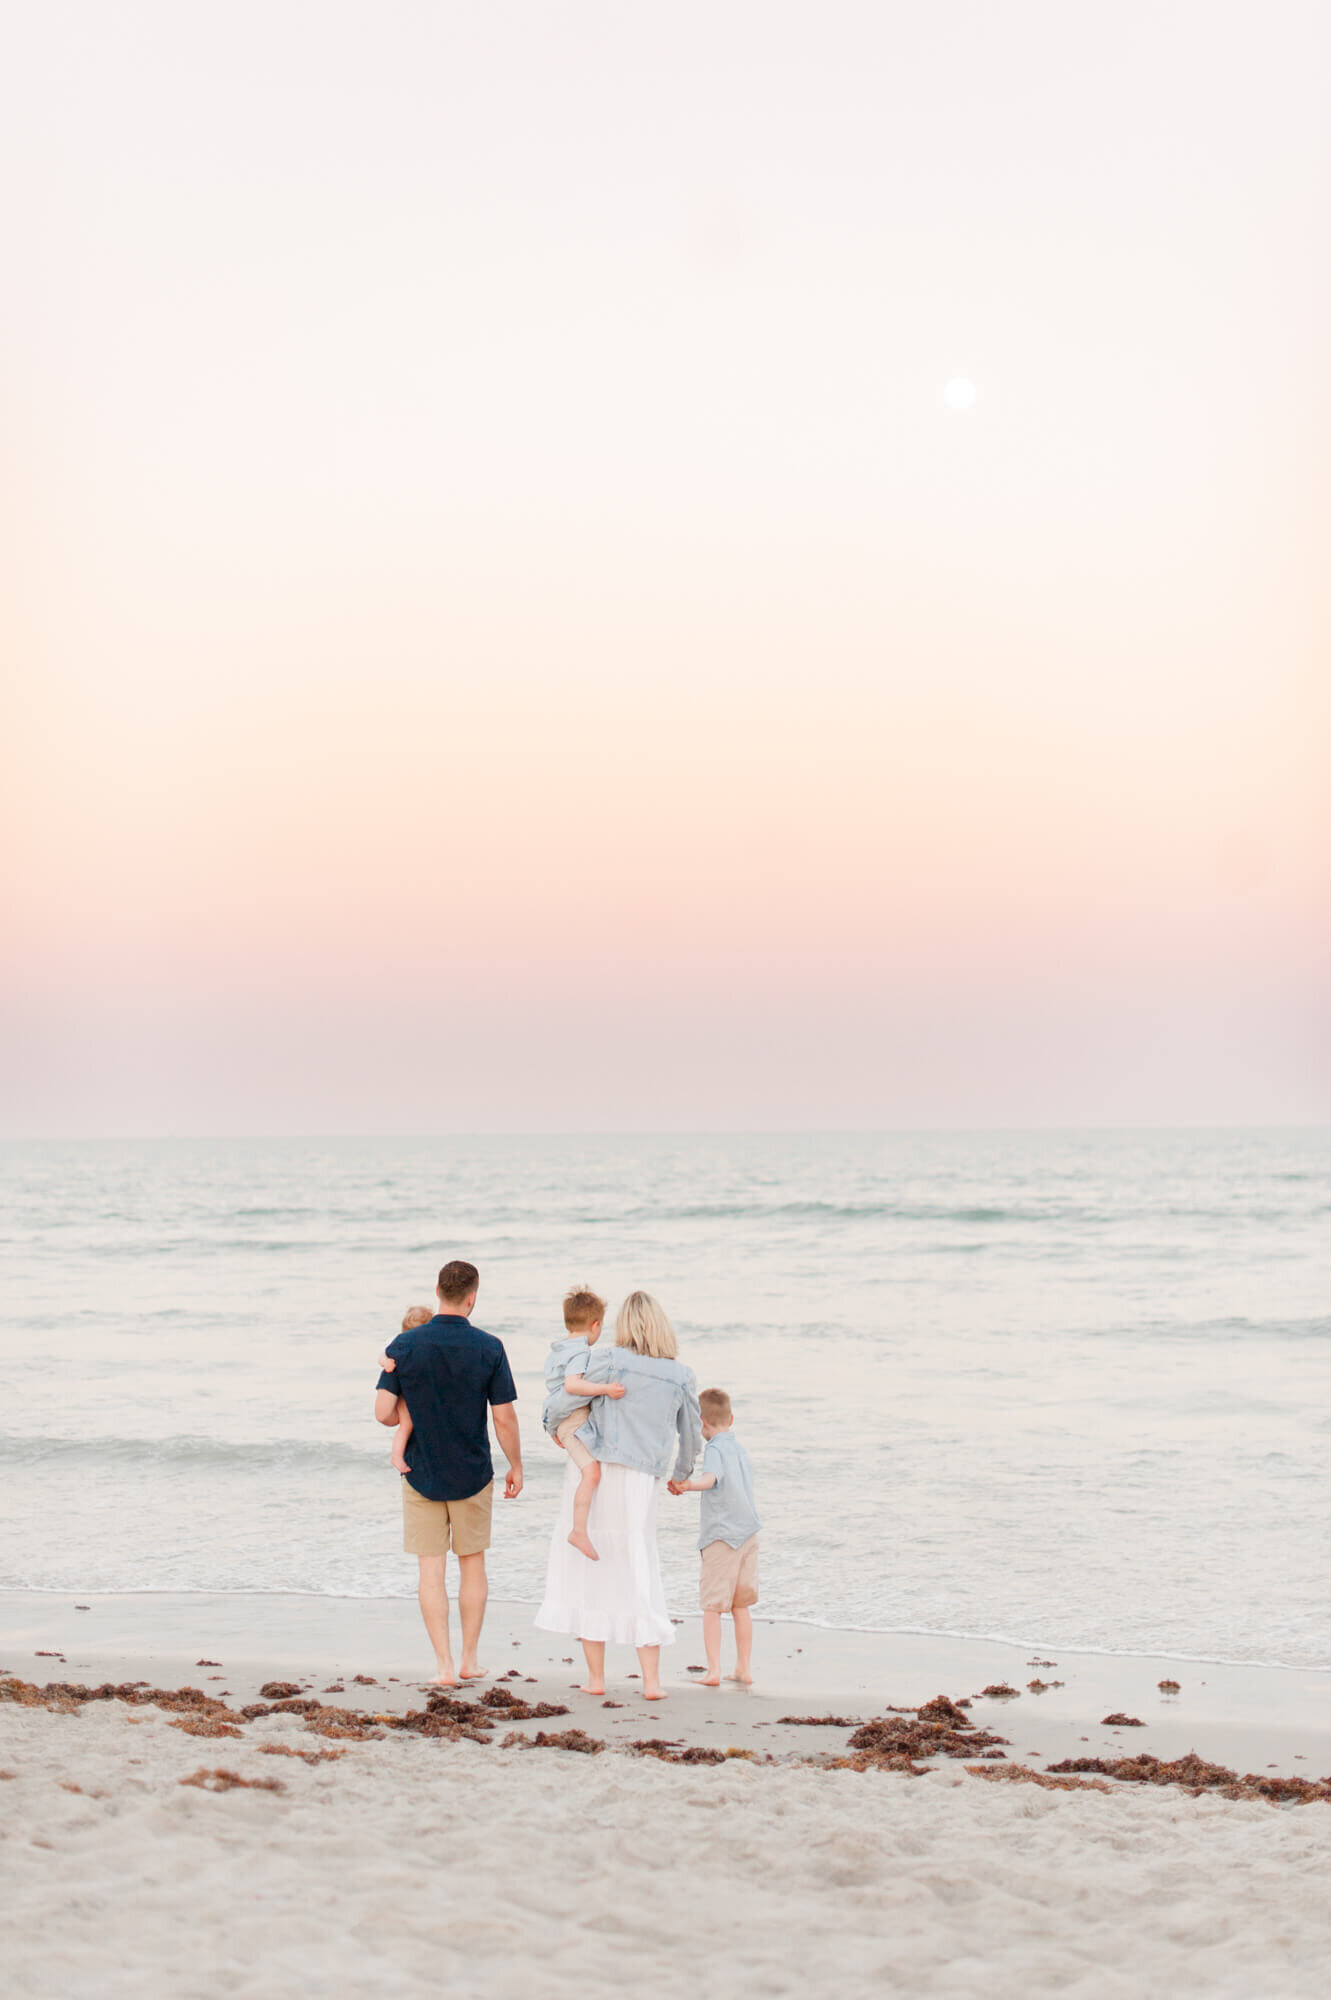 Family of five looking at the moon and watching the waves crash during sunset on Melbourne Beach, FL.